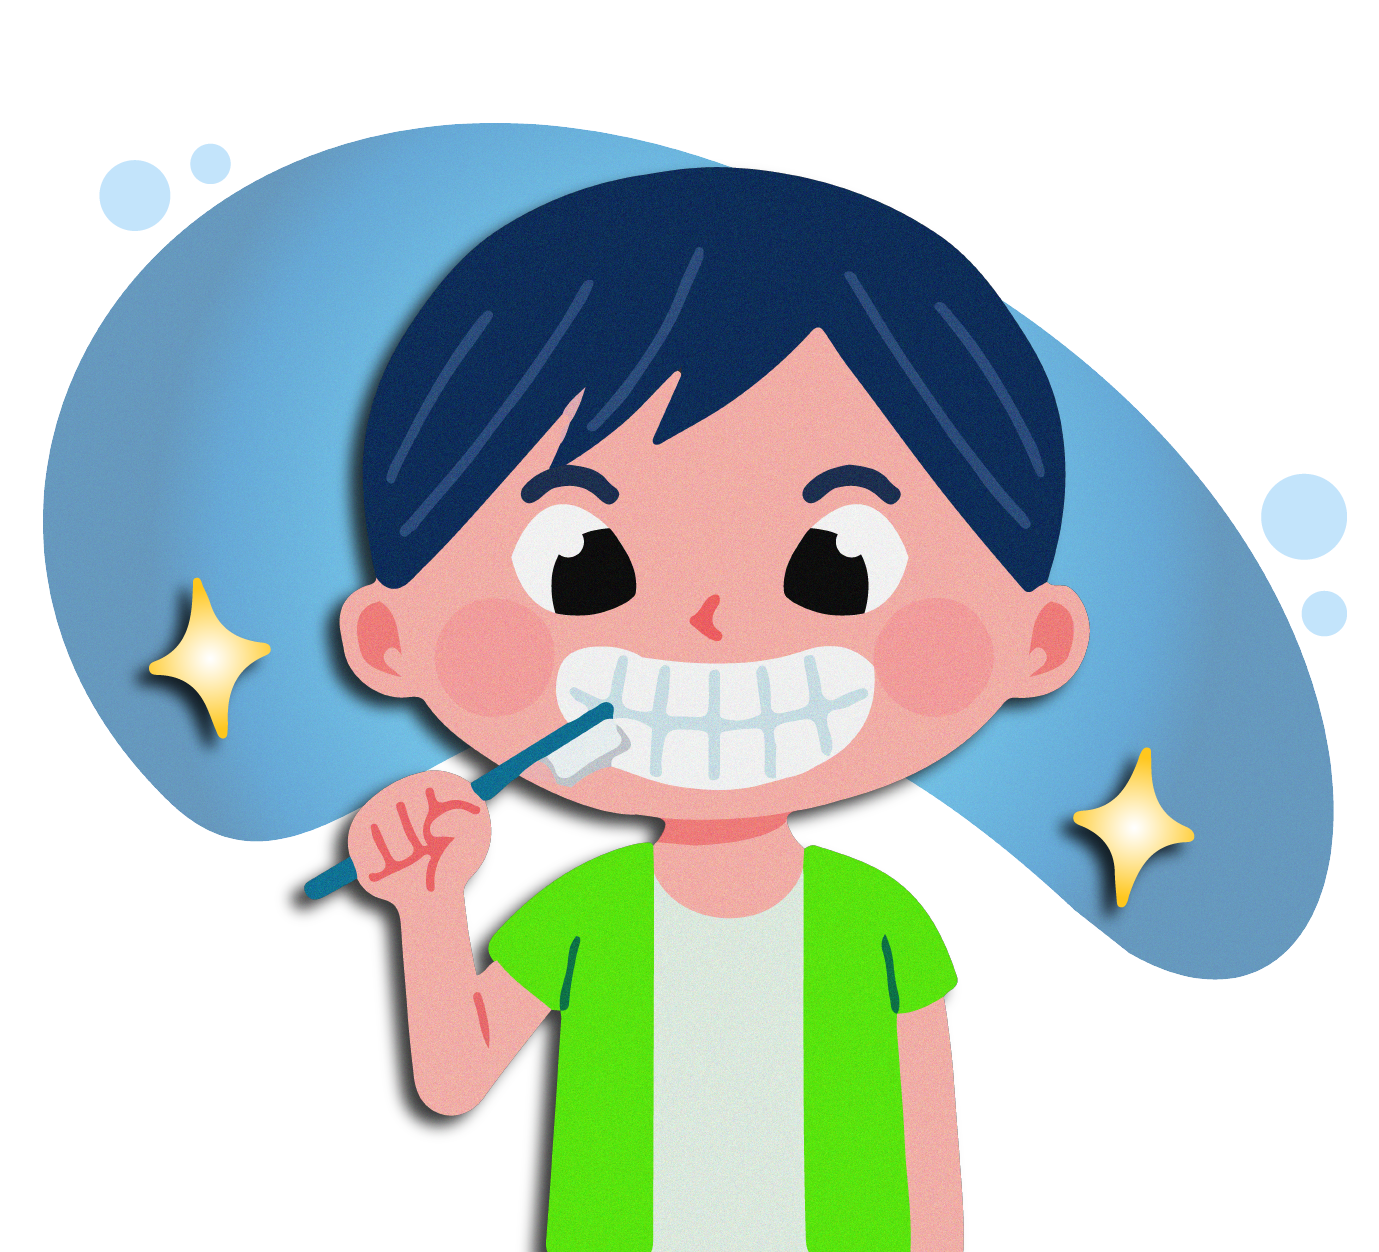 Illustration of a young child brushing their teeth